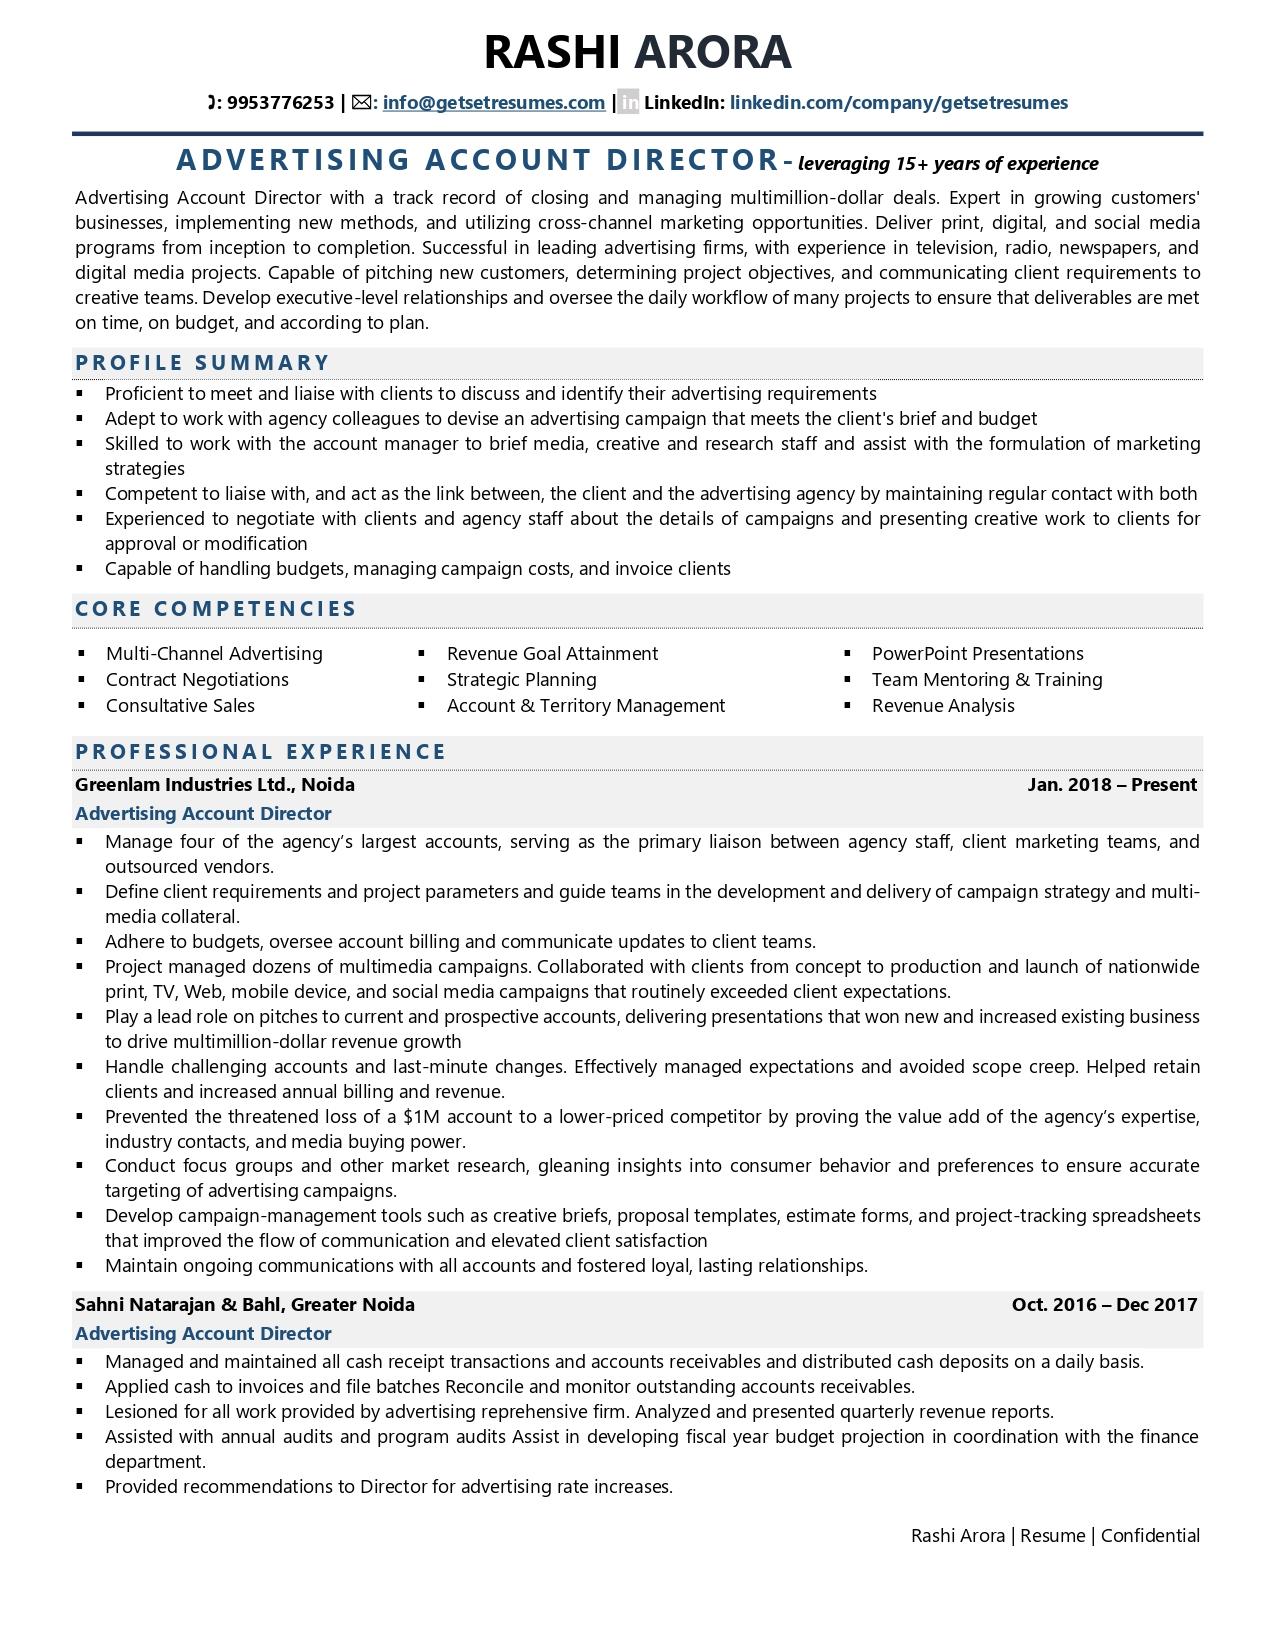 Account Director (Advertising) - Resume Example & Template